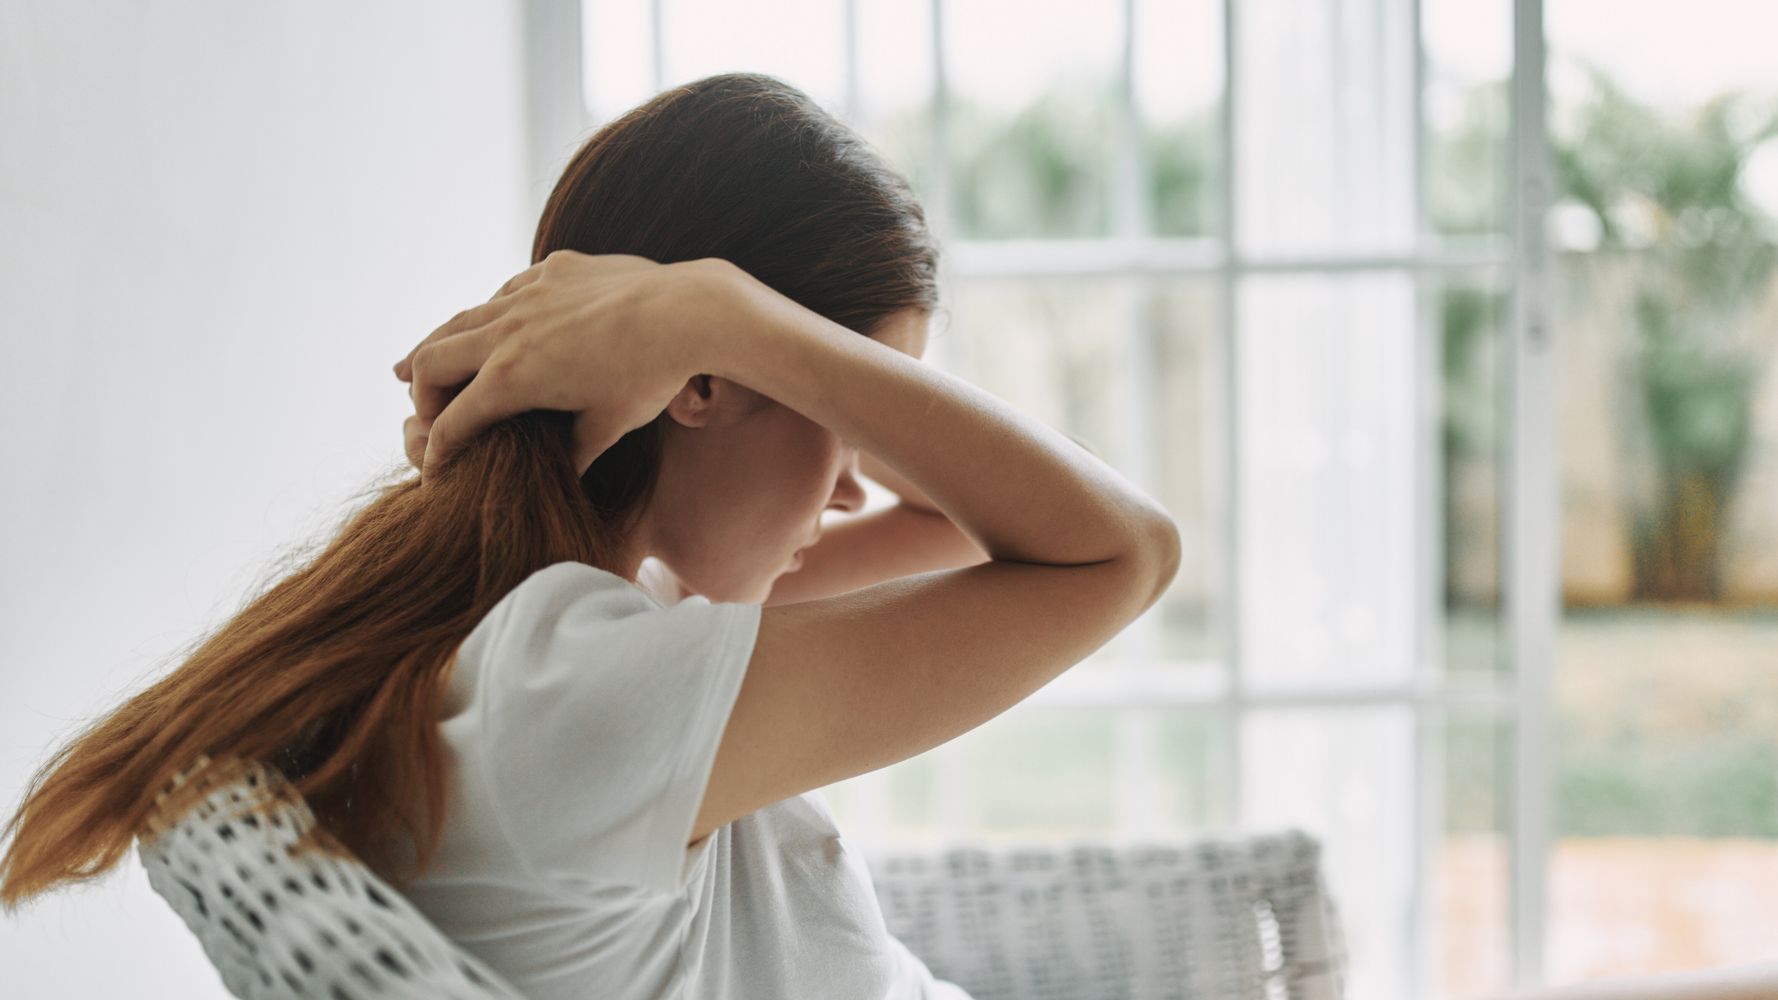 5 Mental Health Conditions That Are Way Underdiagnosed